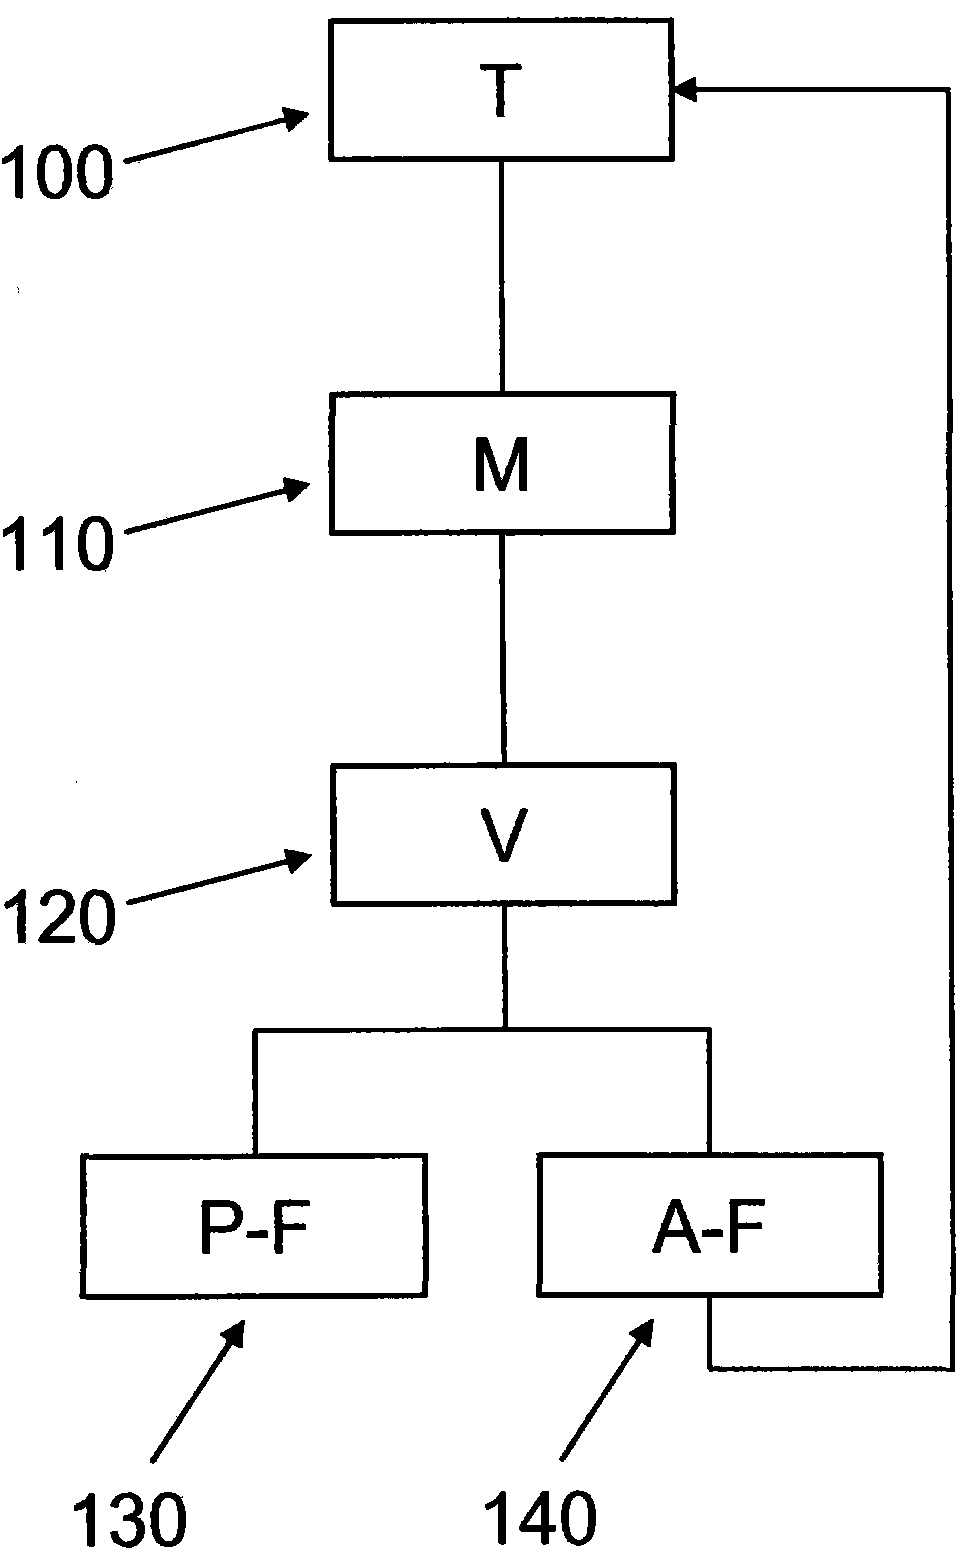 Method for controlling a mobile identification transmitter